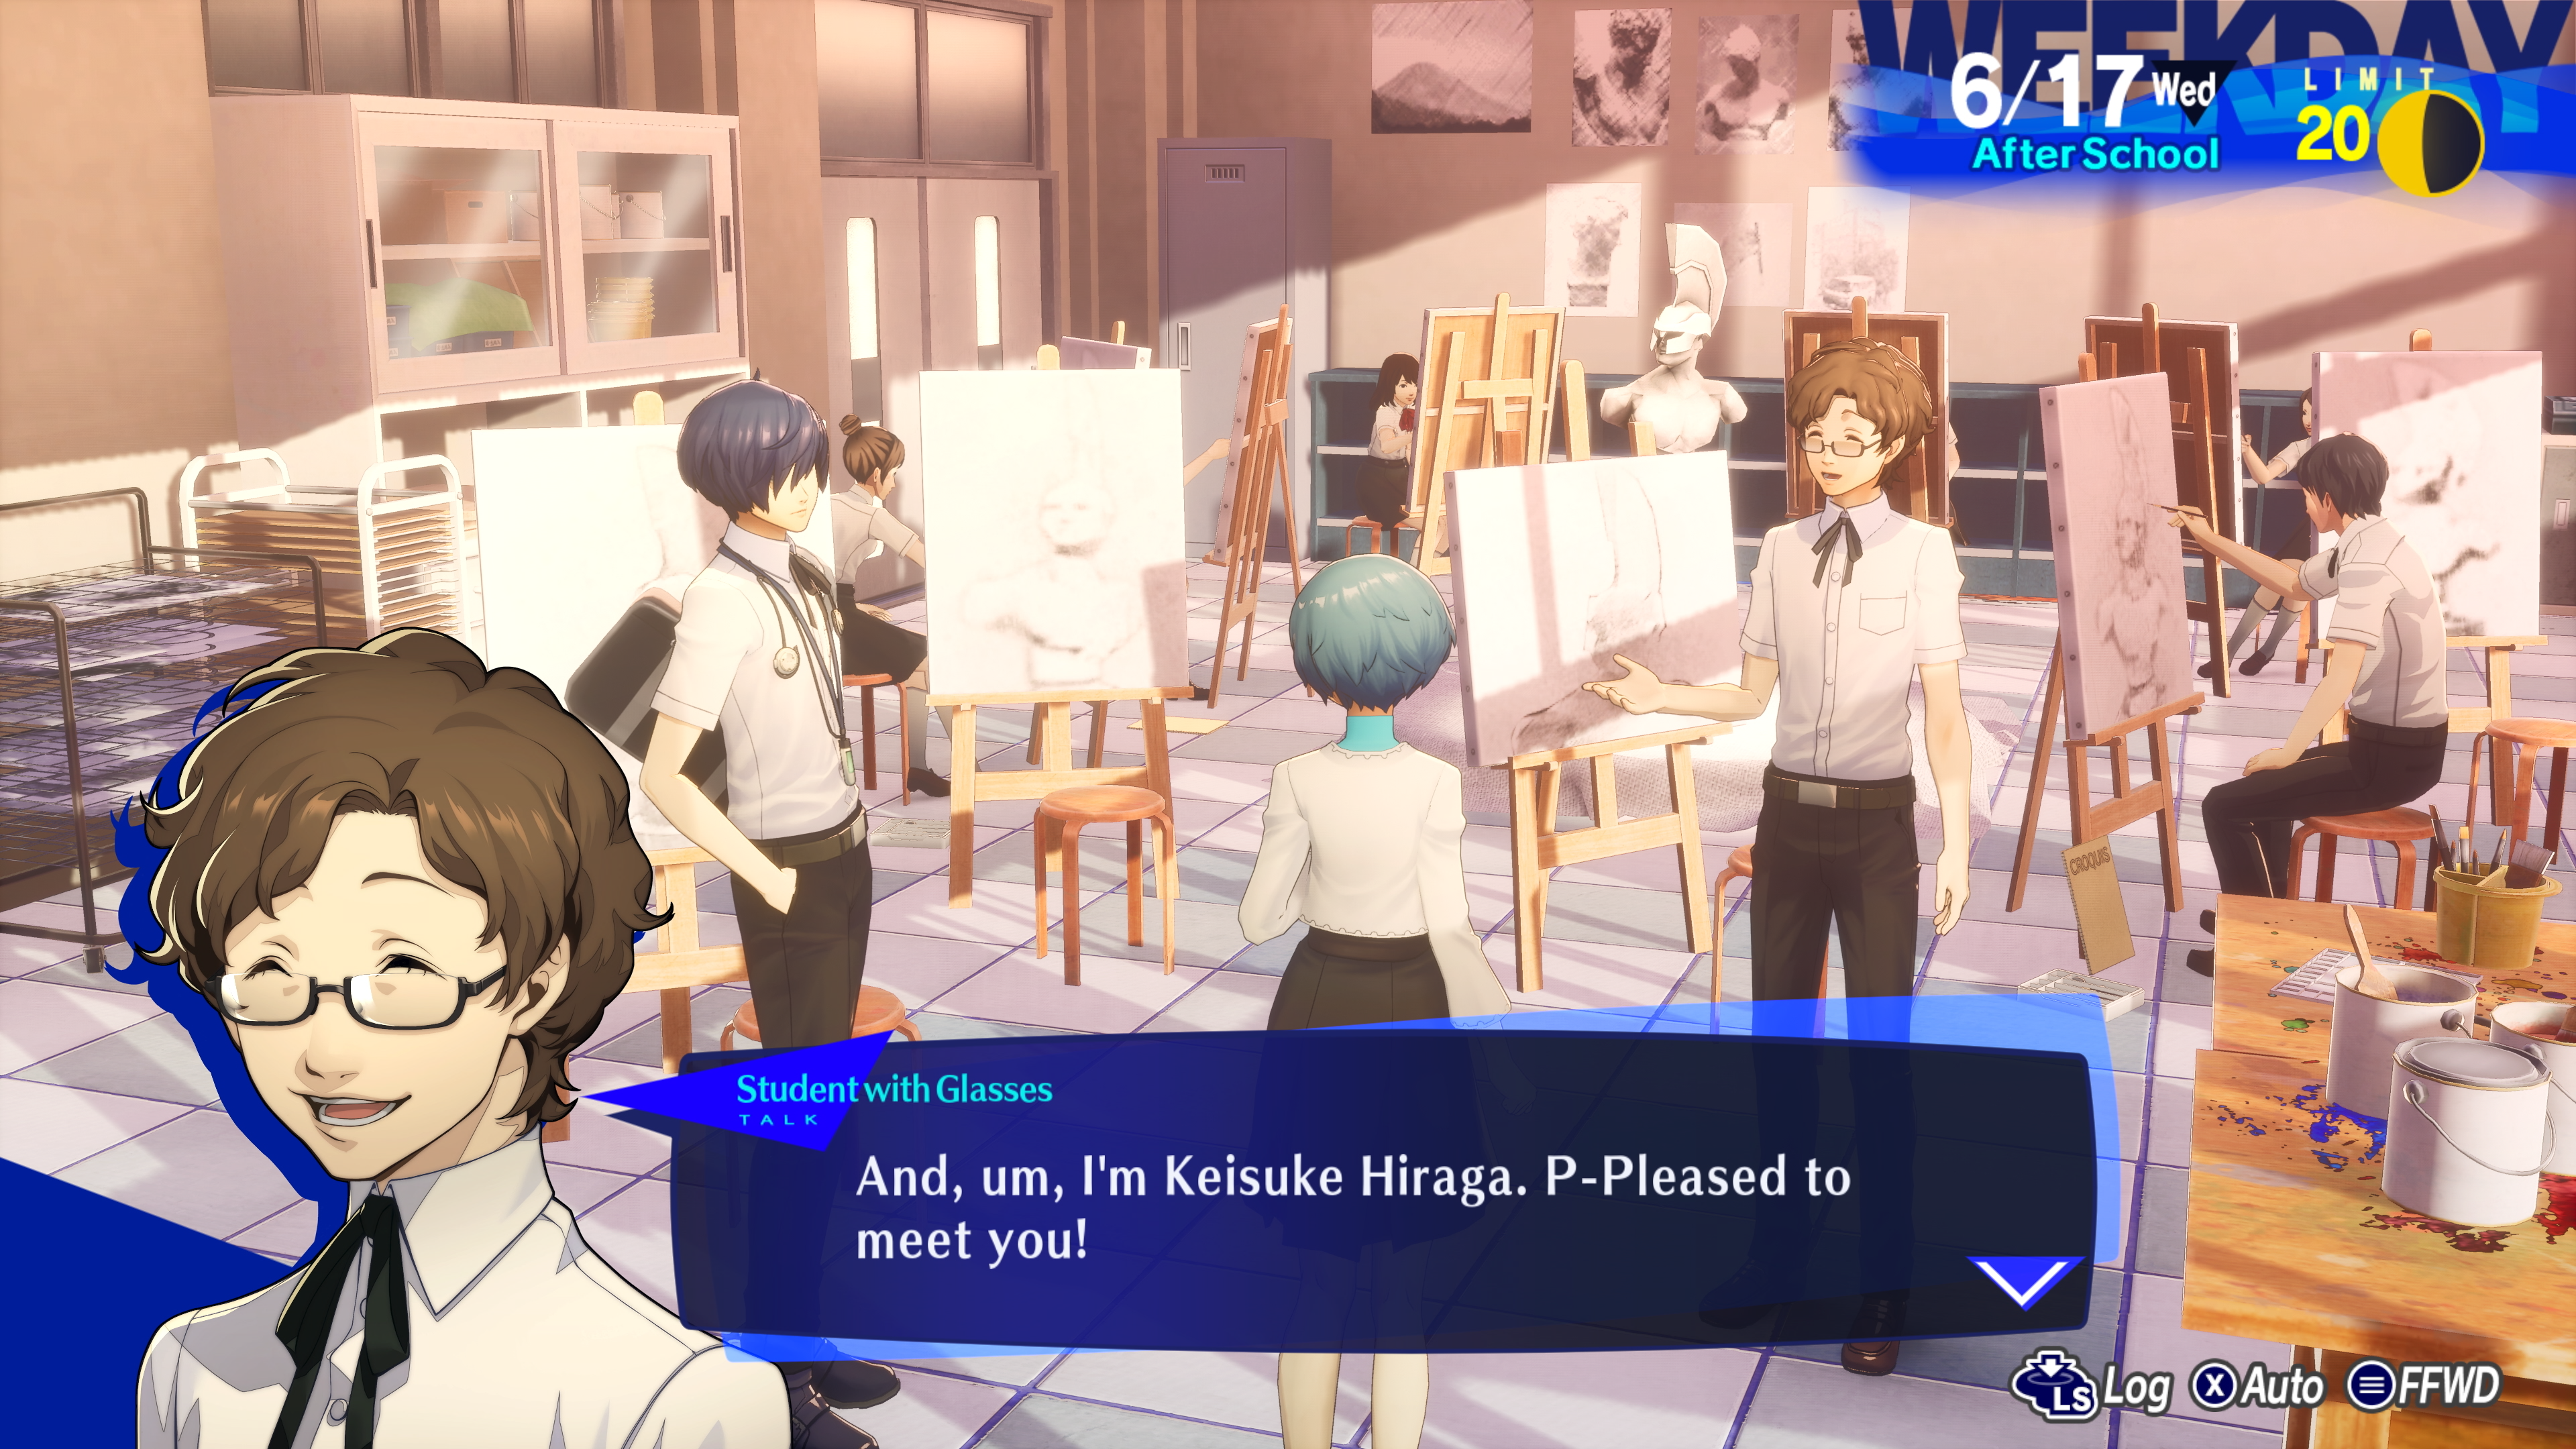 Persona 3 Reload announced with gorgeous trailer